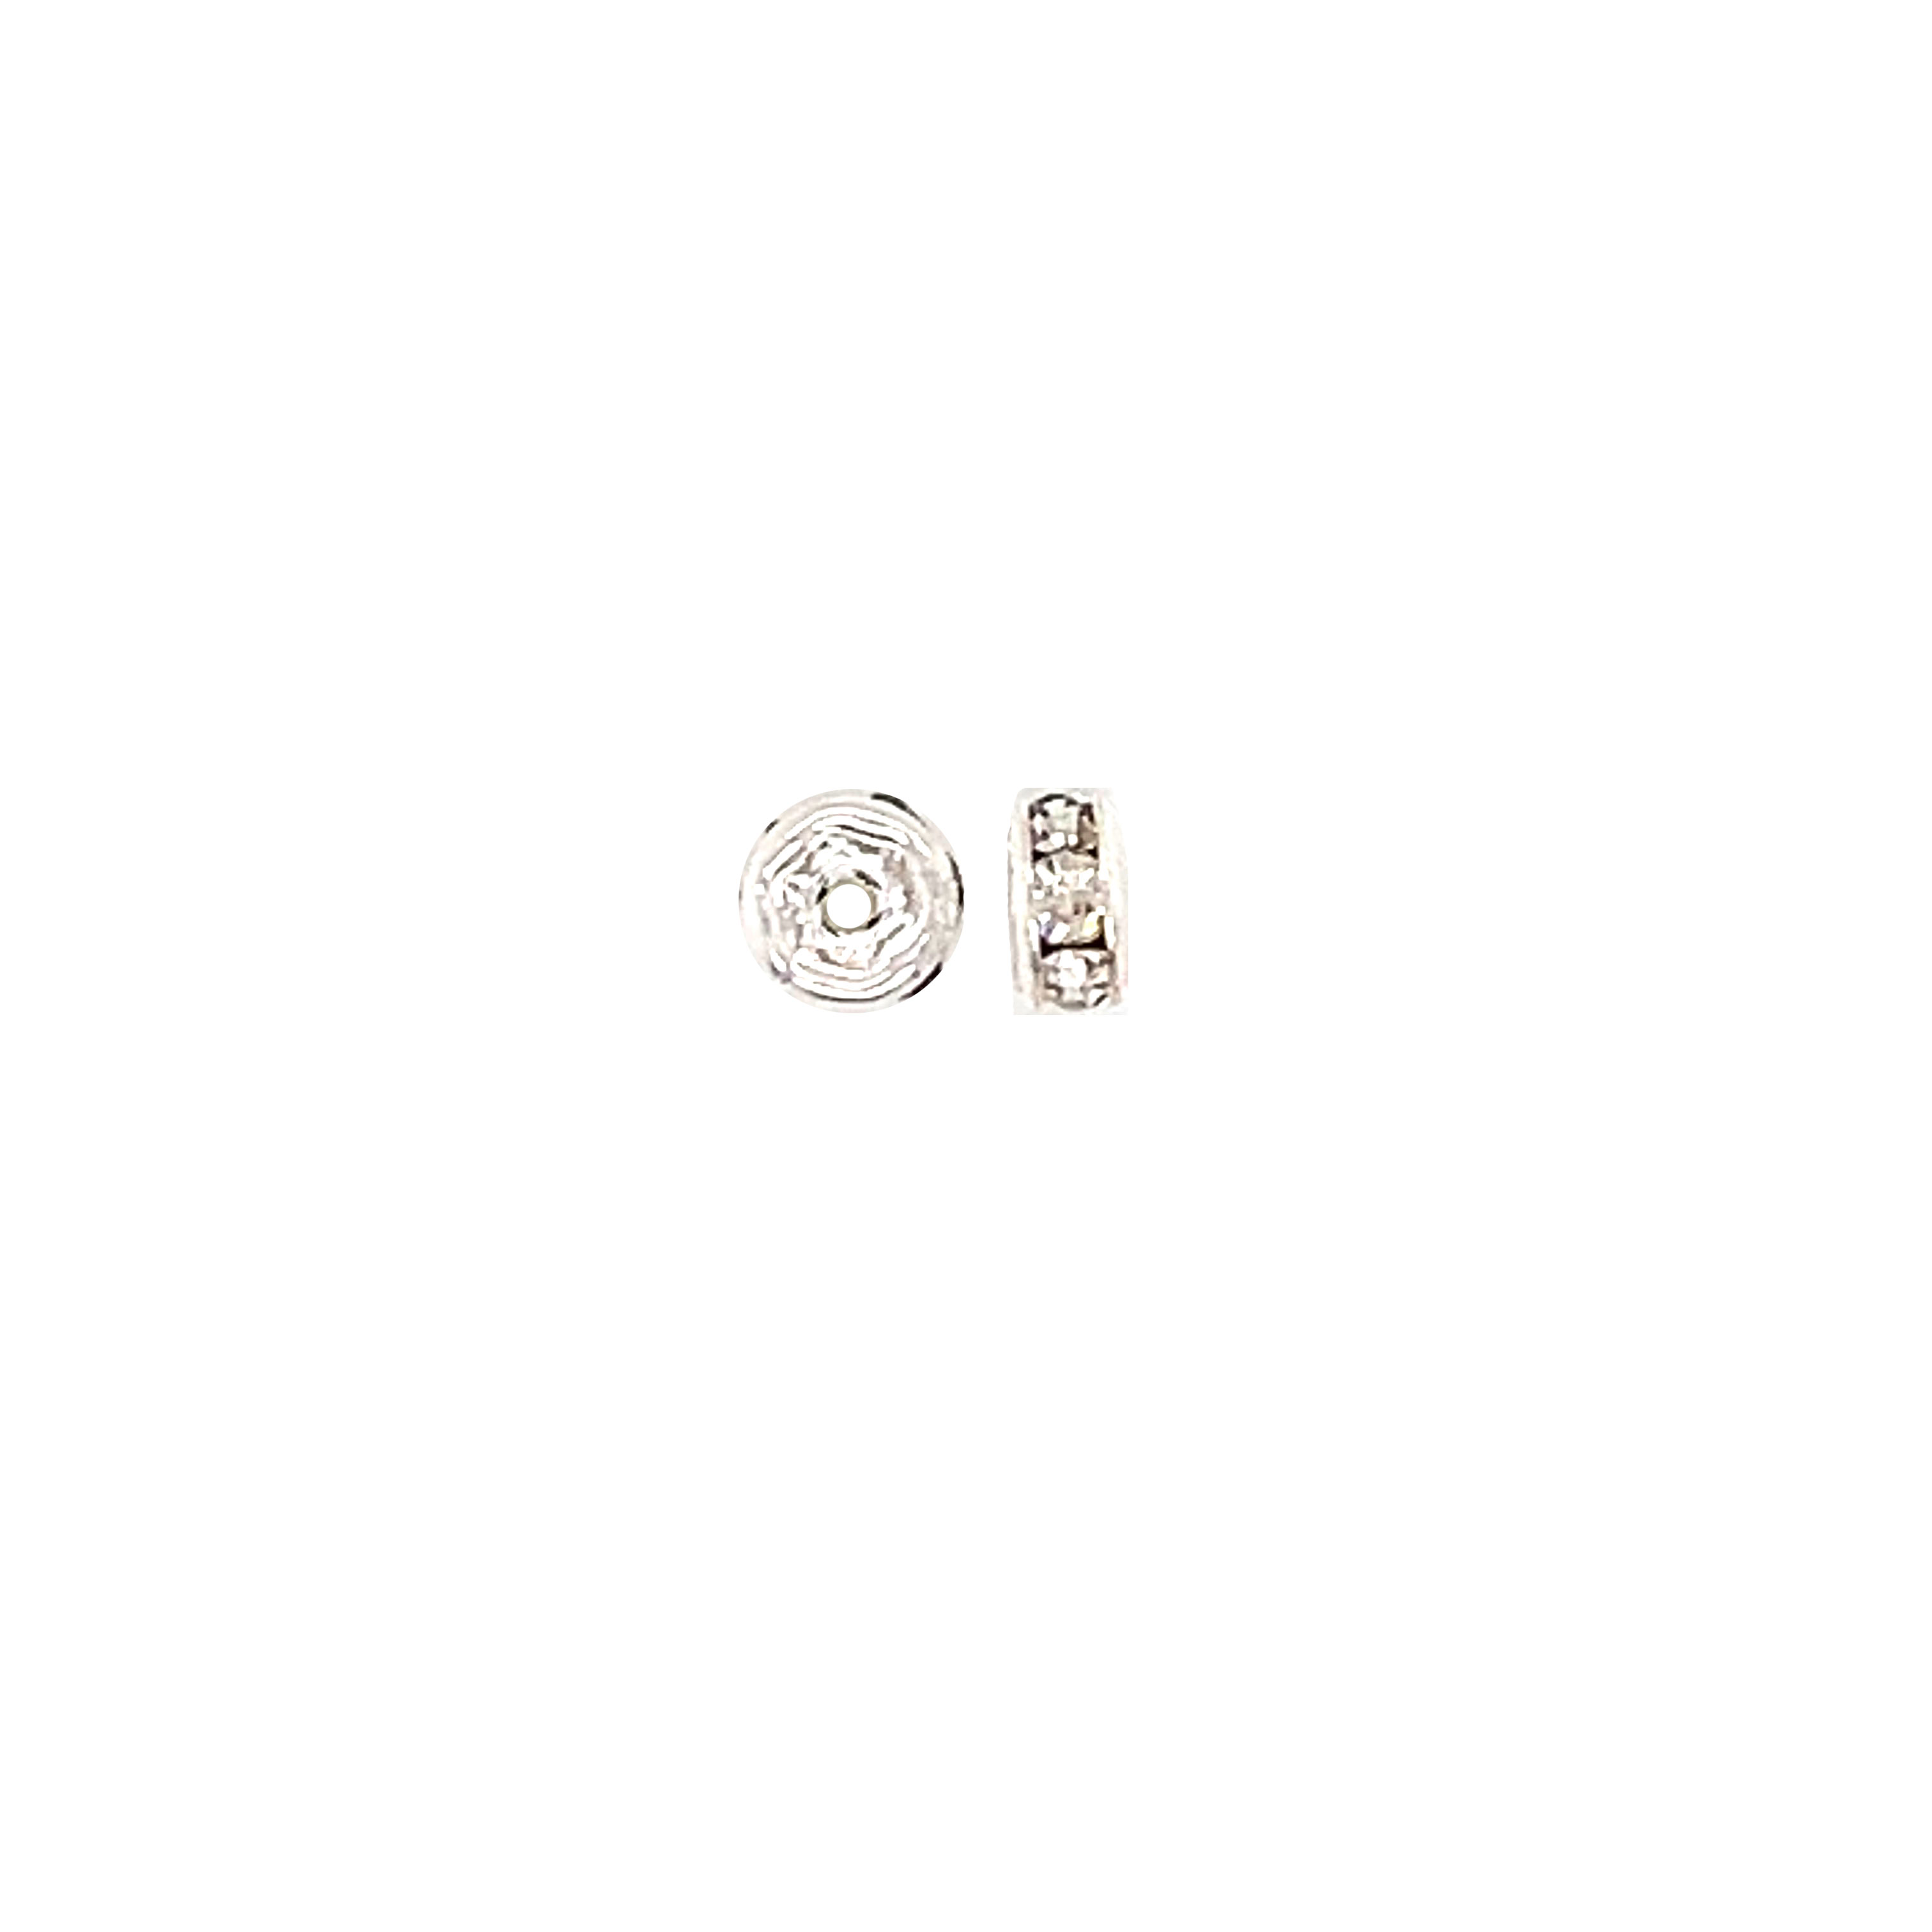 CZ 4mm Clear Tone Silver Tone Rondelle - Pack of 10